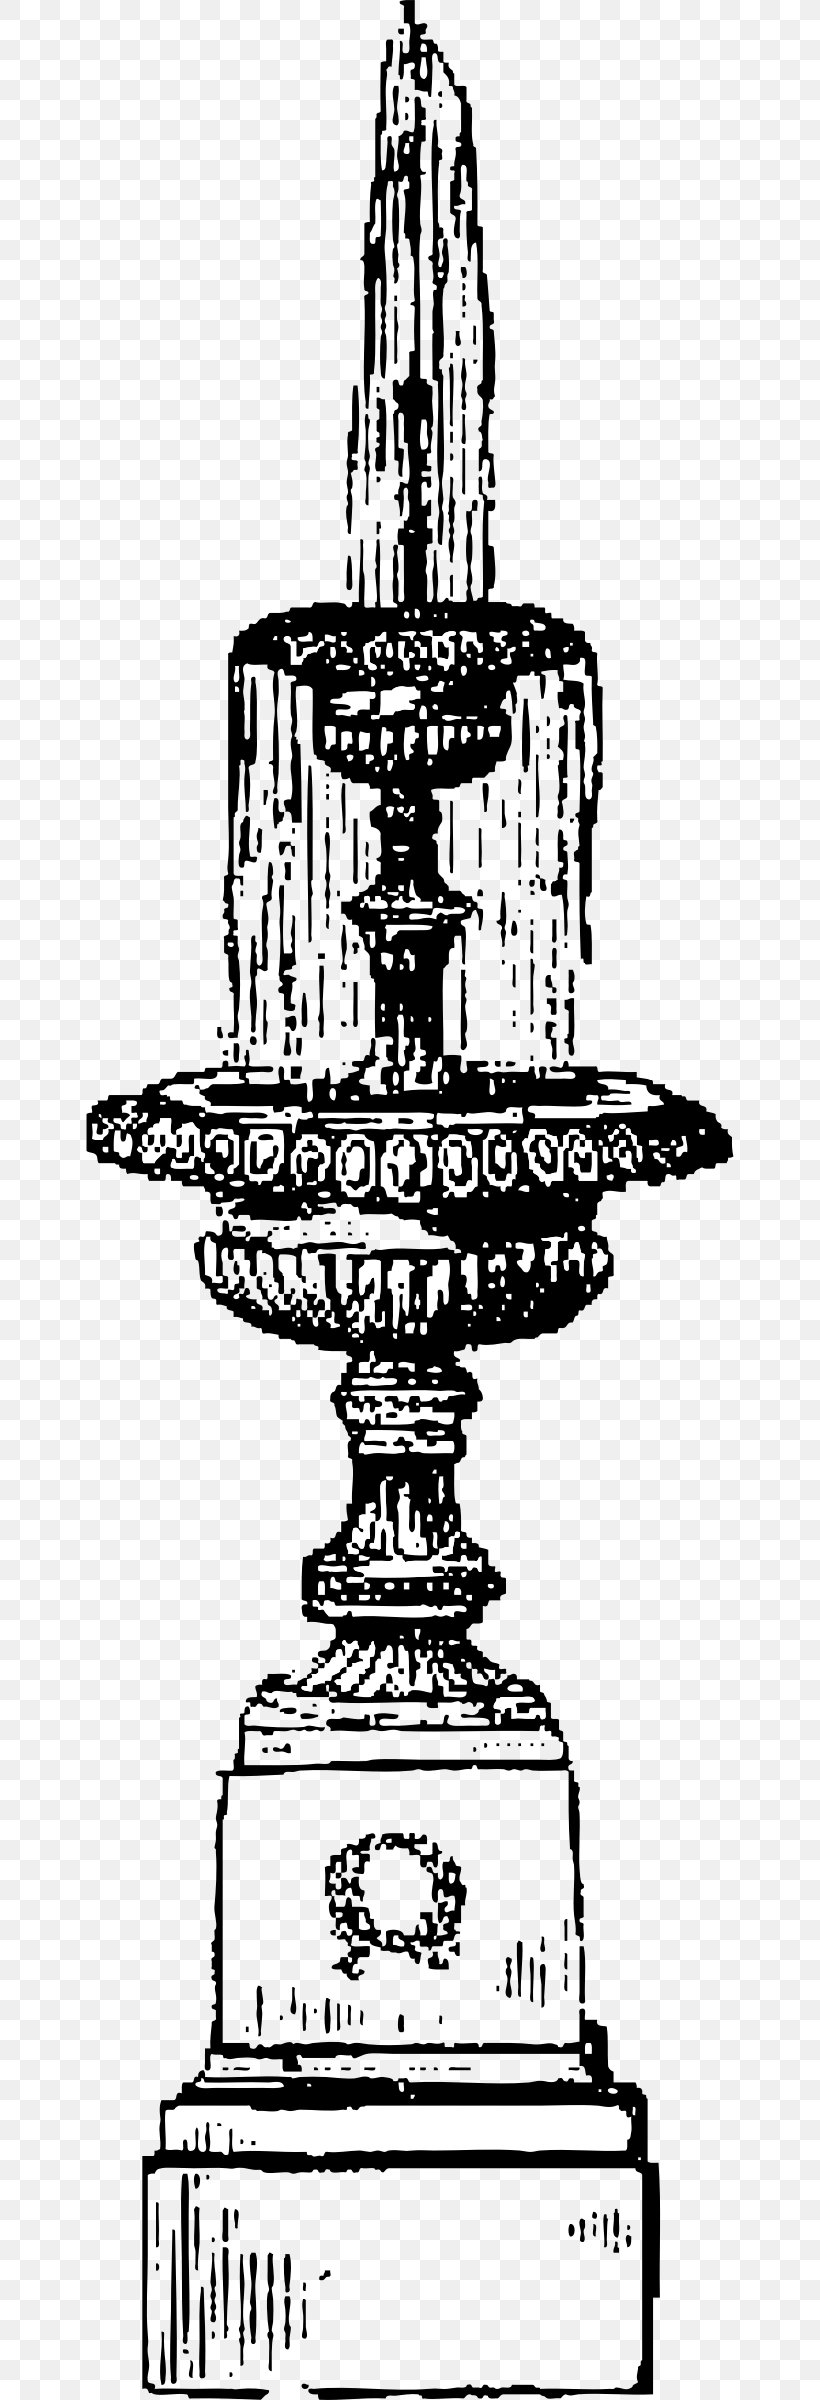 Clip Art Vector Graphics Fountain Image, PNG, 648x2400px, Fountain, Black And White, Drawing, Drinking Fountains, Line Art Download Free